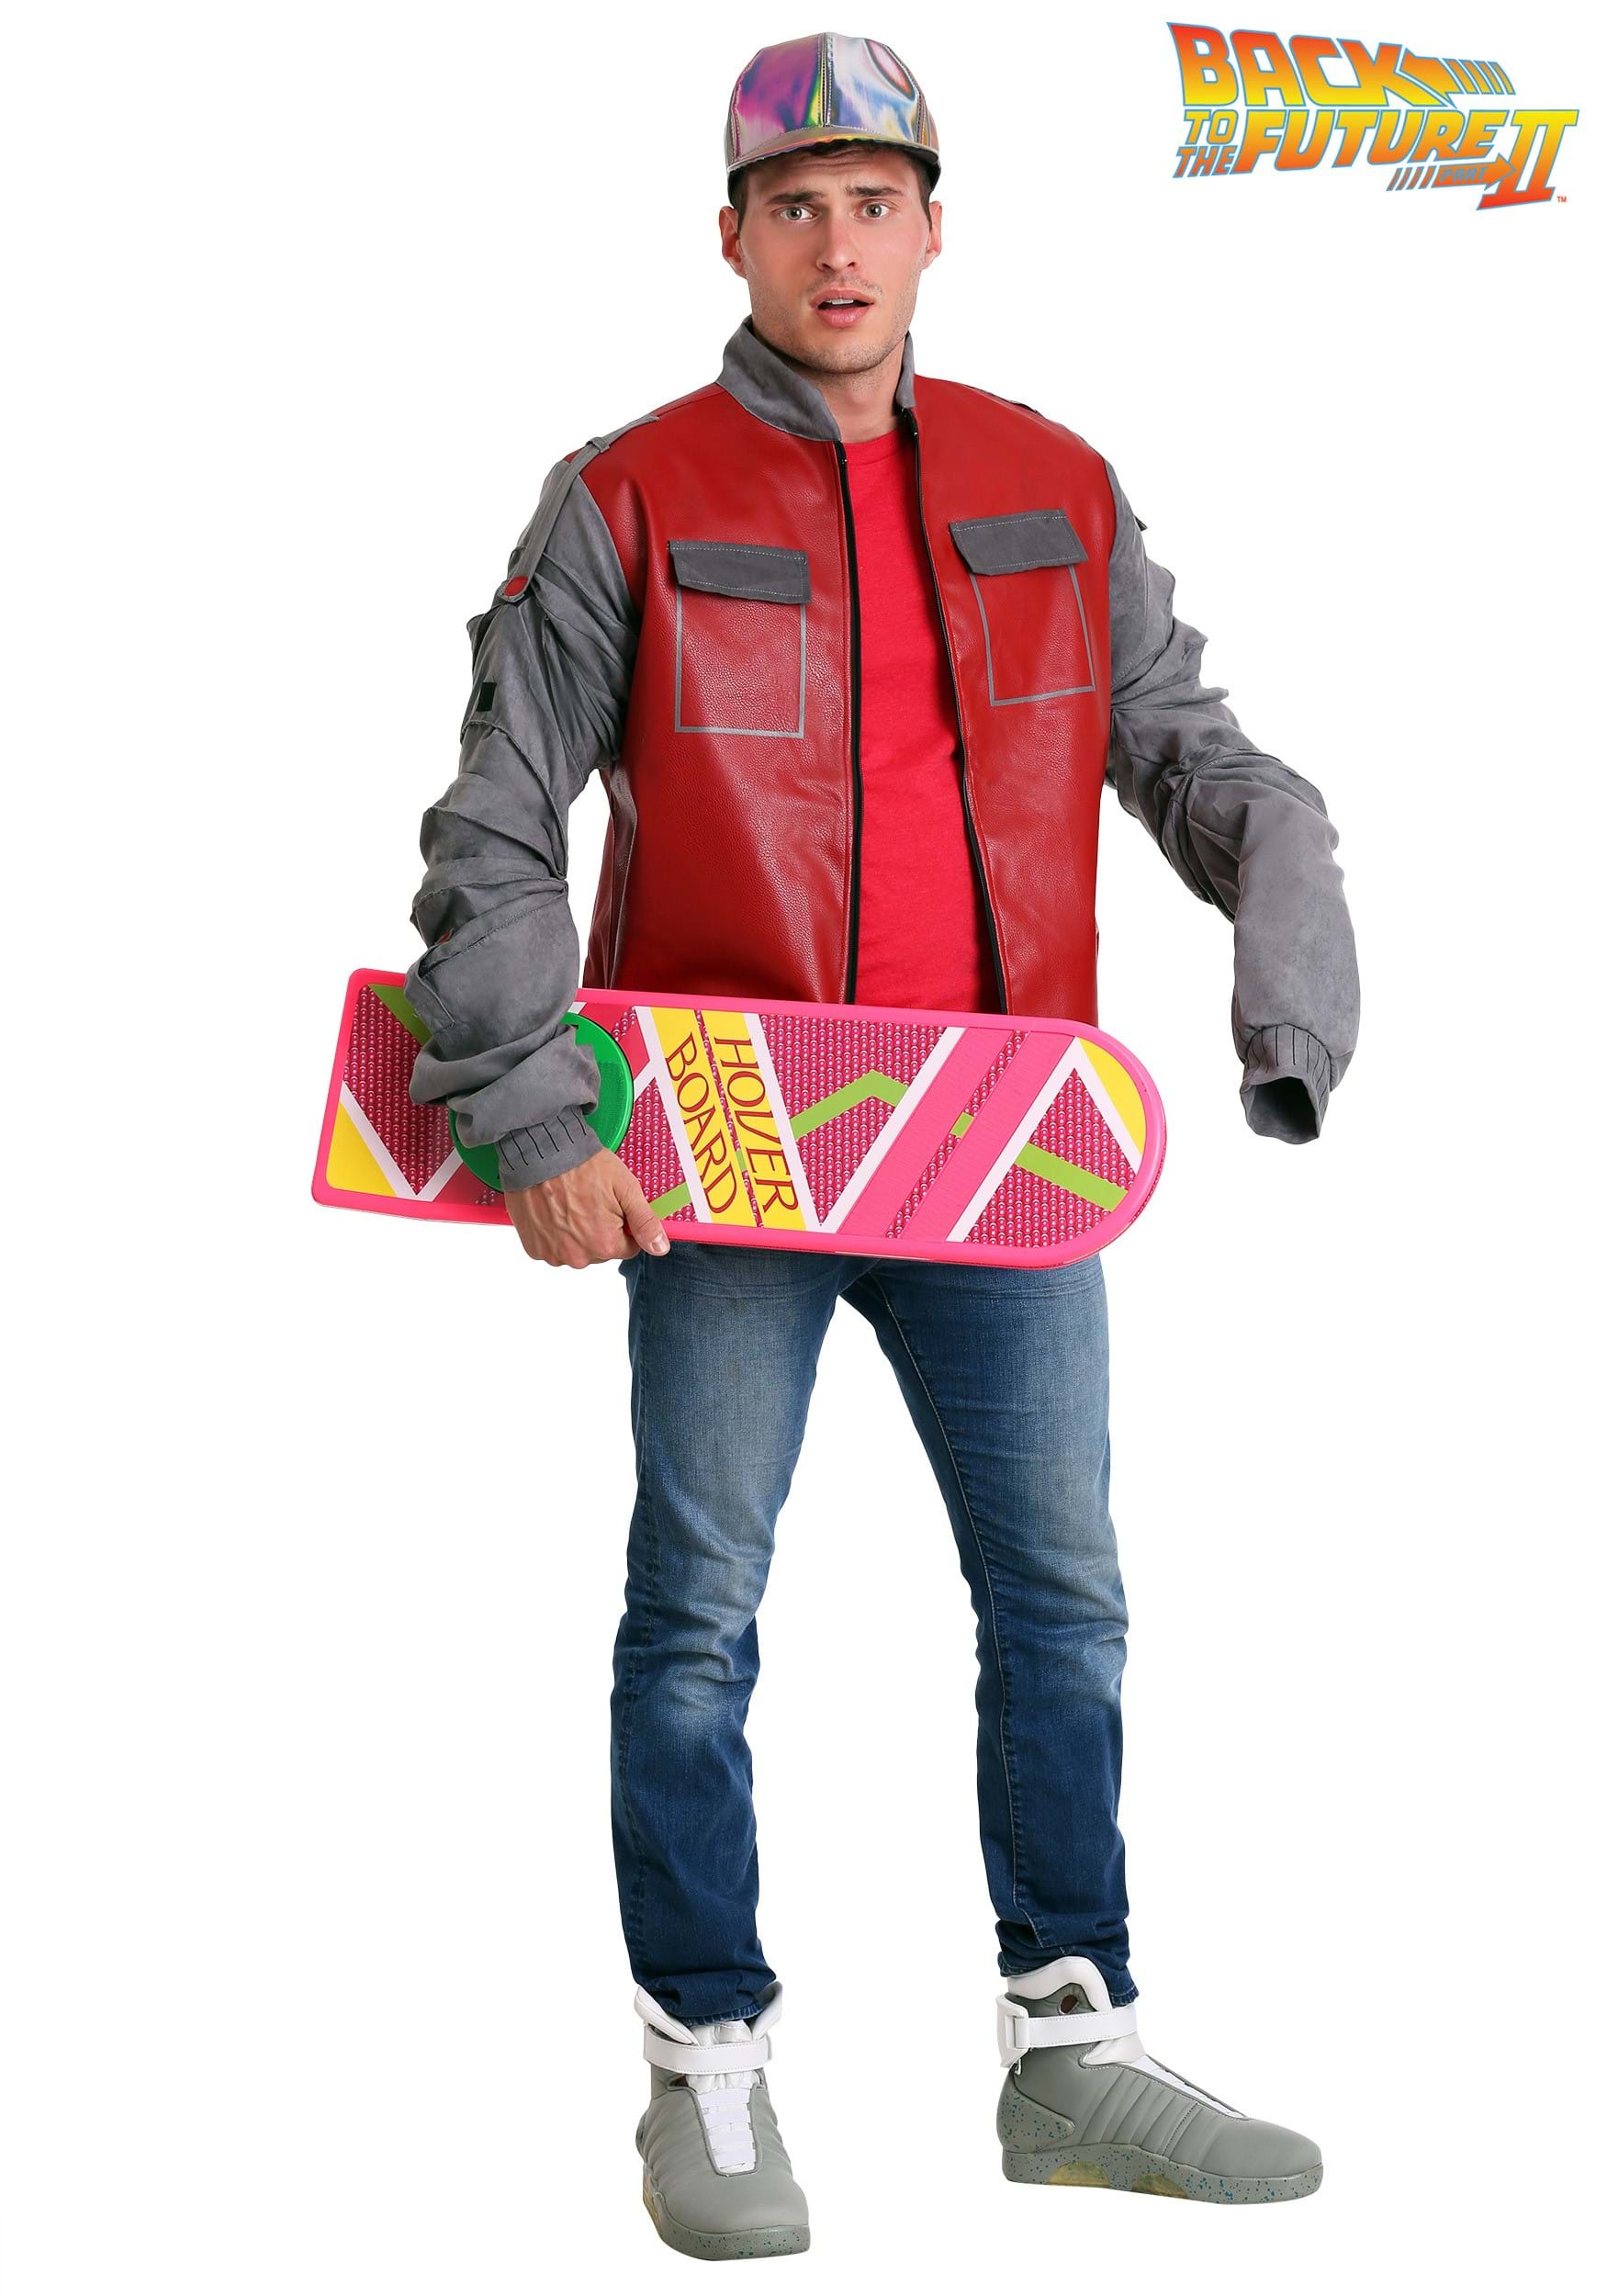 Back to the Future Marty McFly Jacket for Men Costume